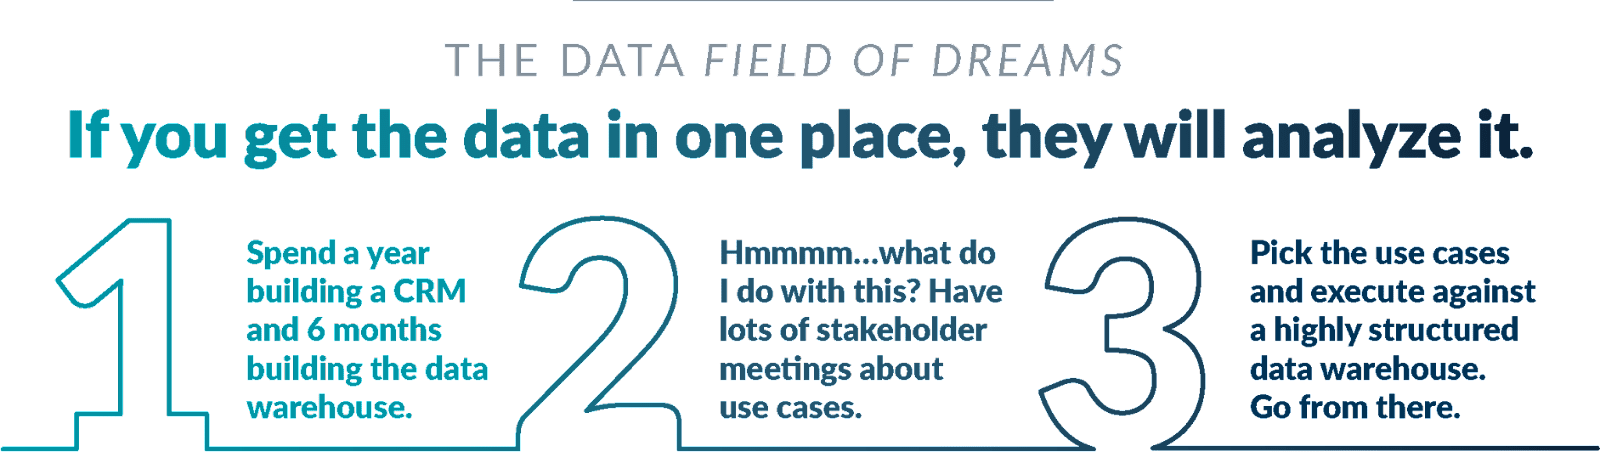 Text-based graphic: The Data Field of Dreams — If you get the data in one place, they will analyze it. 
1. Spend a year building a CRM and 6 months building the data warehouse.
2. Hmmmm...what do I do with this? Have lots of stakeholder meetings about use cases.
3. Pick the use cases and execute agains a highly structure data warehouse. Go from there.